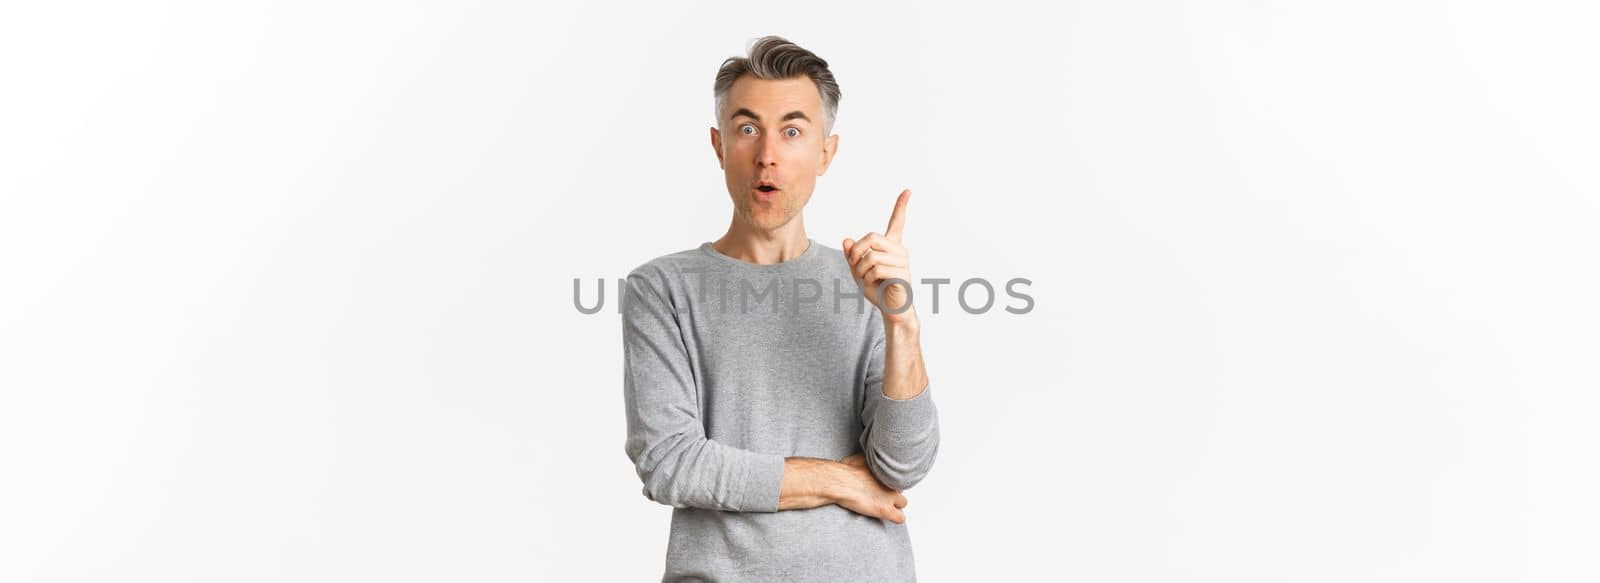 Portrait of thoughtful adult male model with short grey hair, raising finger up, having an idea, say suggestion, standing over white background.